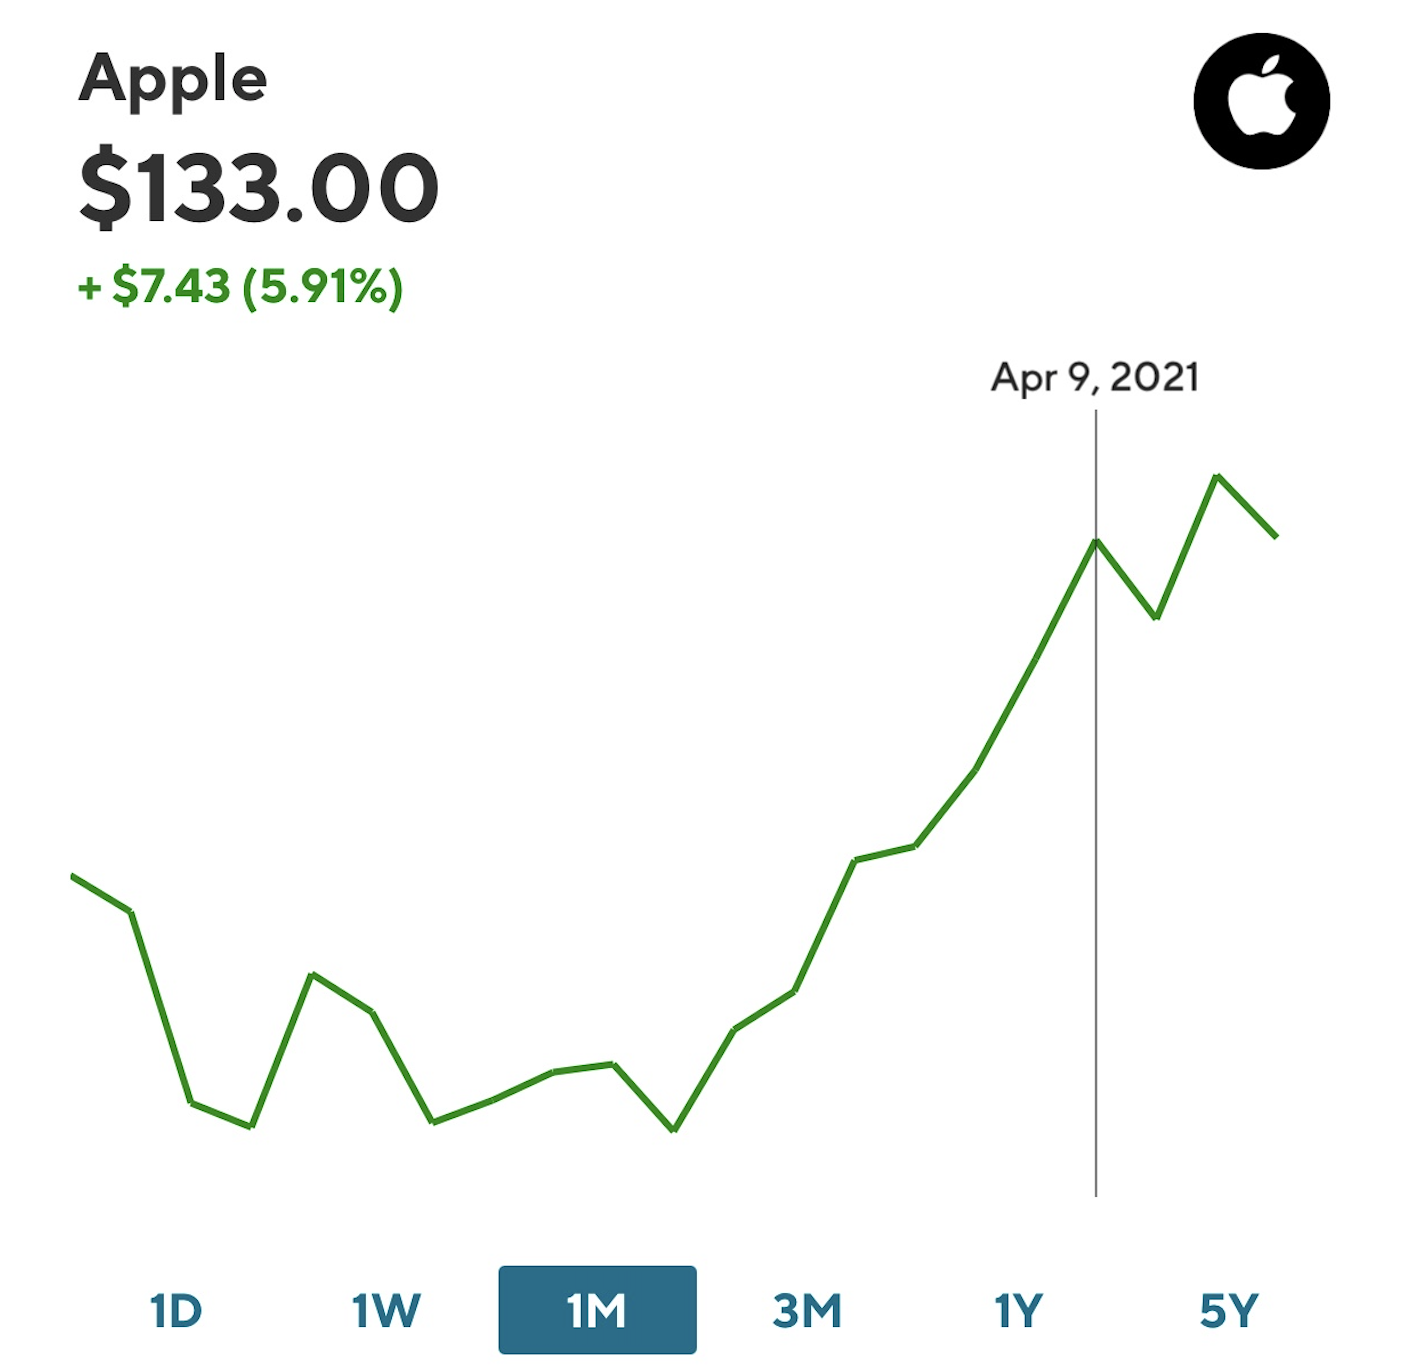 This graph shows that Apple&#x27;s stock price increased in the last month